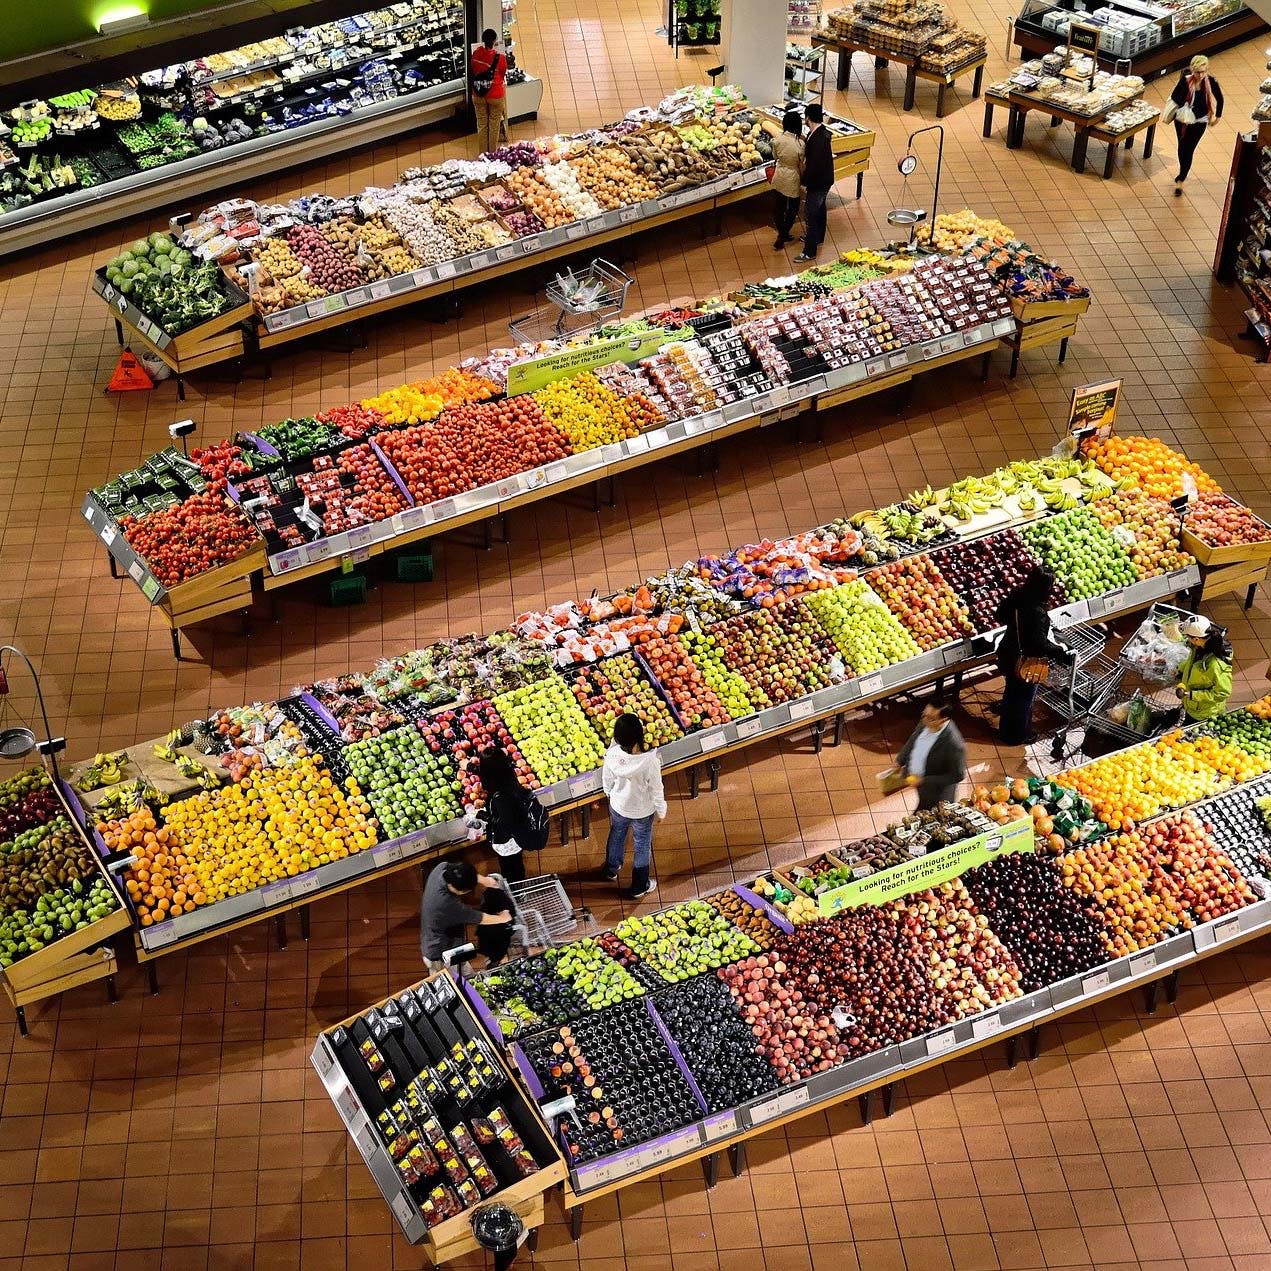 Supermarket,Grocery store,Whole food,Retail,Natural foods,Convenience food,Food,Plant,Building,Convenience store